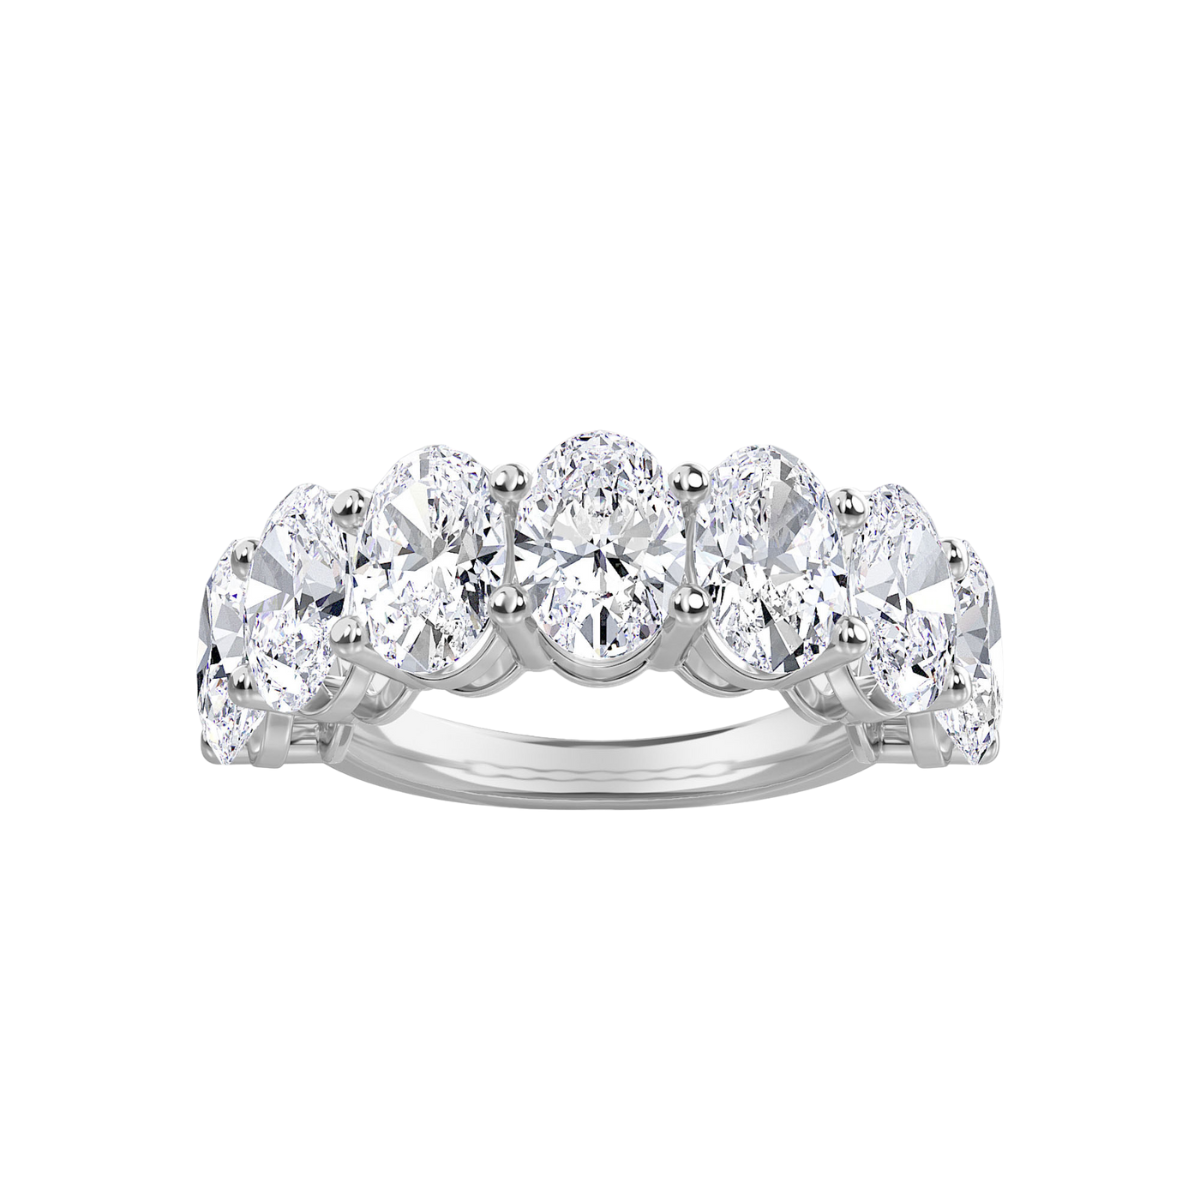 7 stone diamond ring meaning